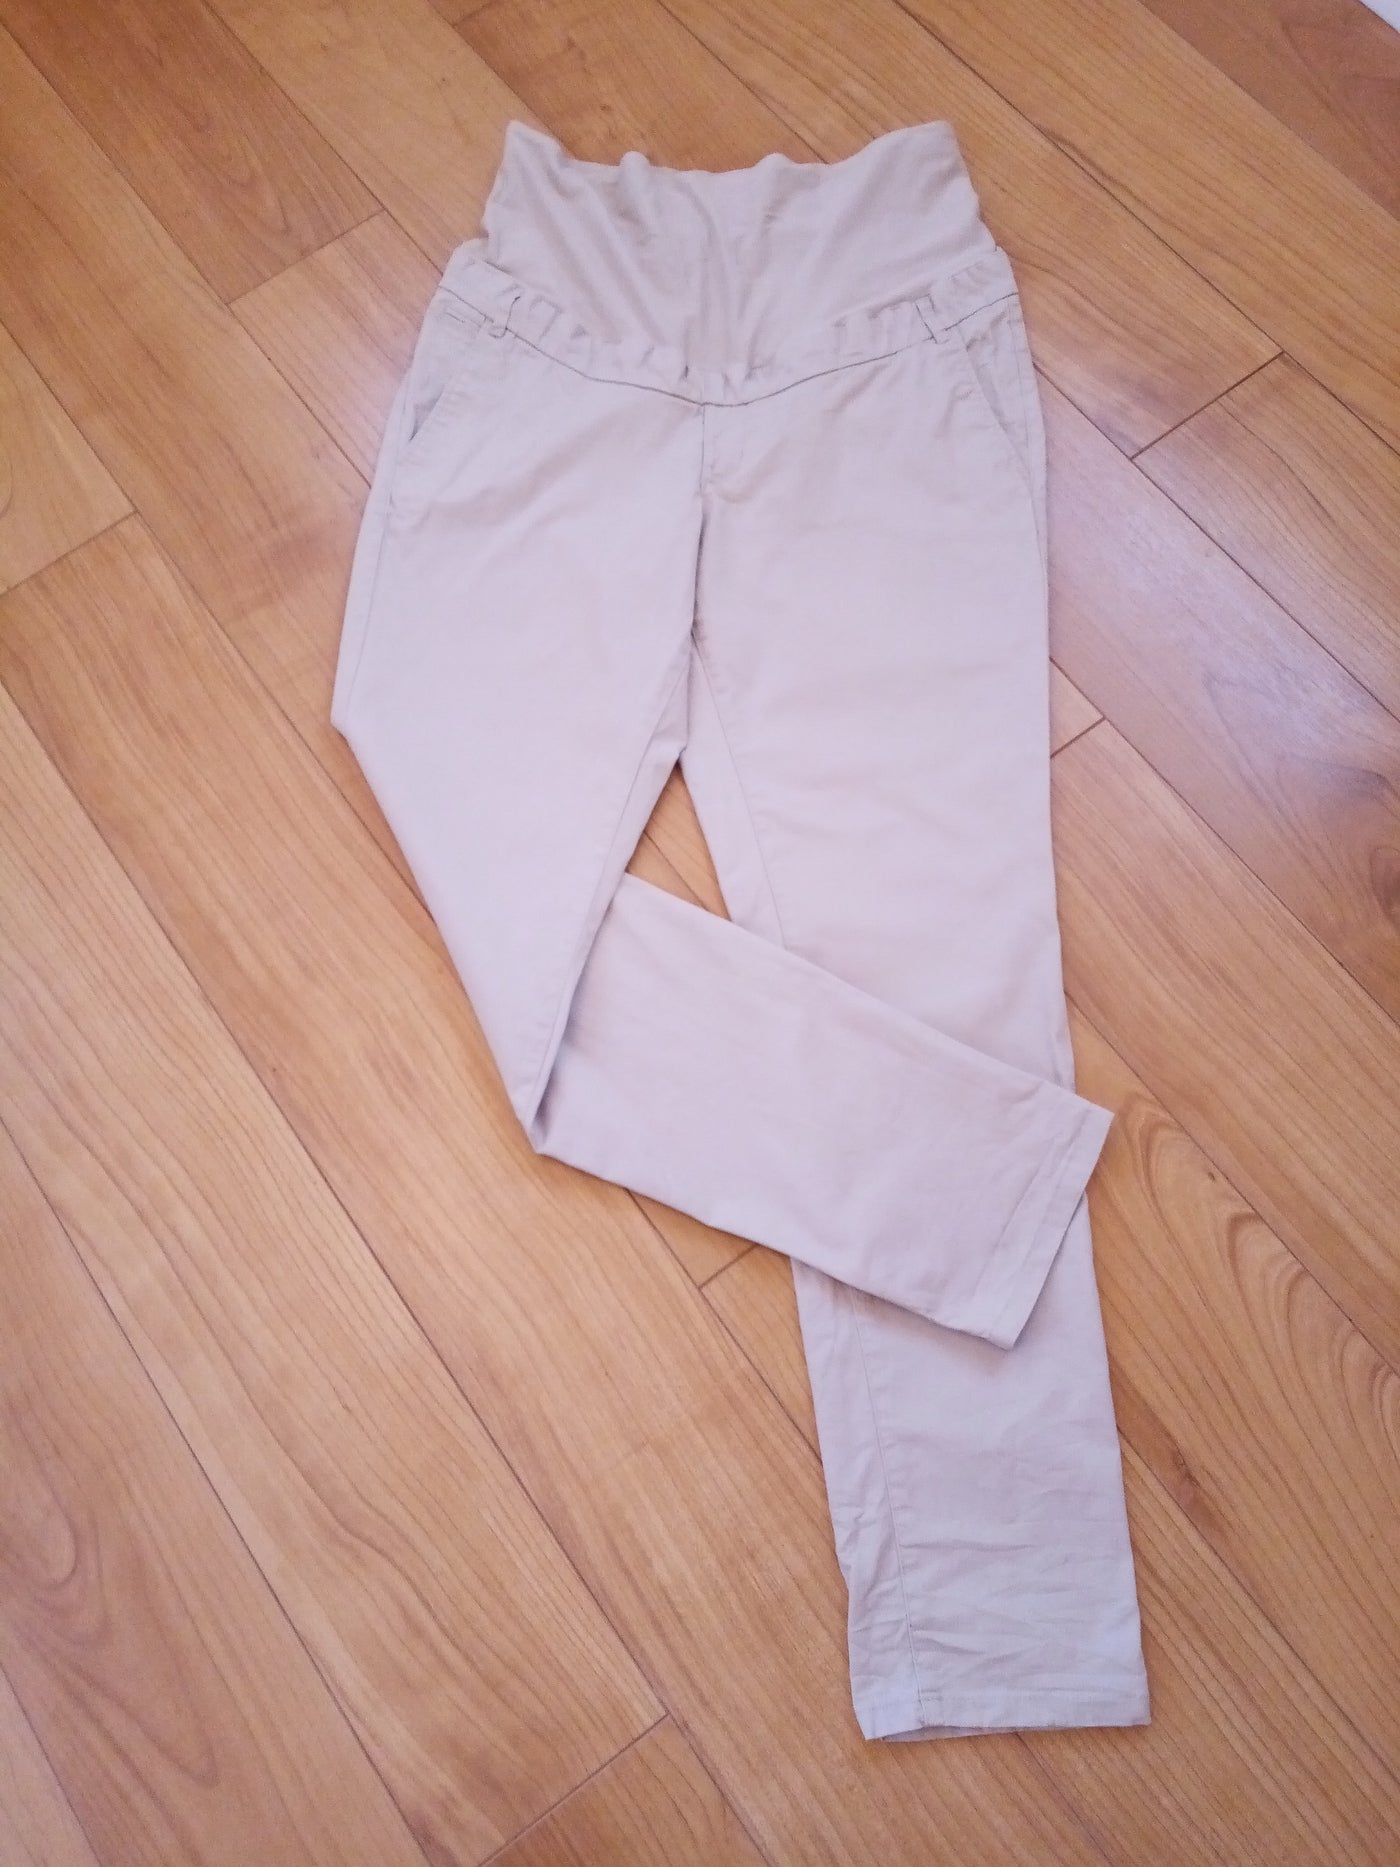 H&M Mama Beige Chino Style Over Bump Trousers - Size 44 (approx UK 16)